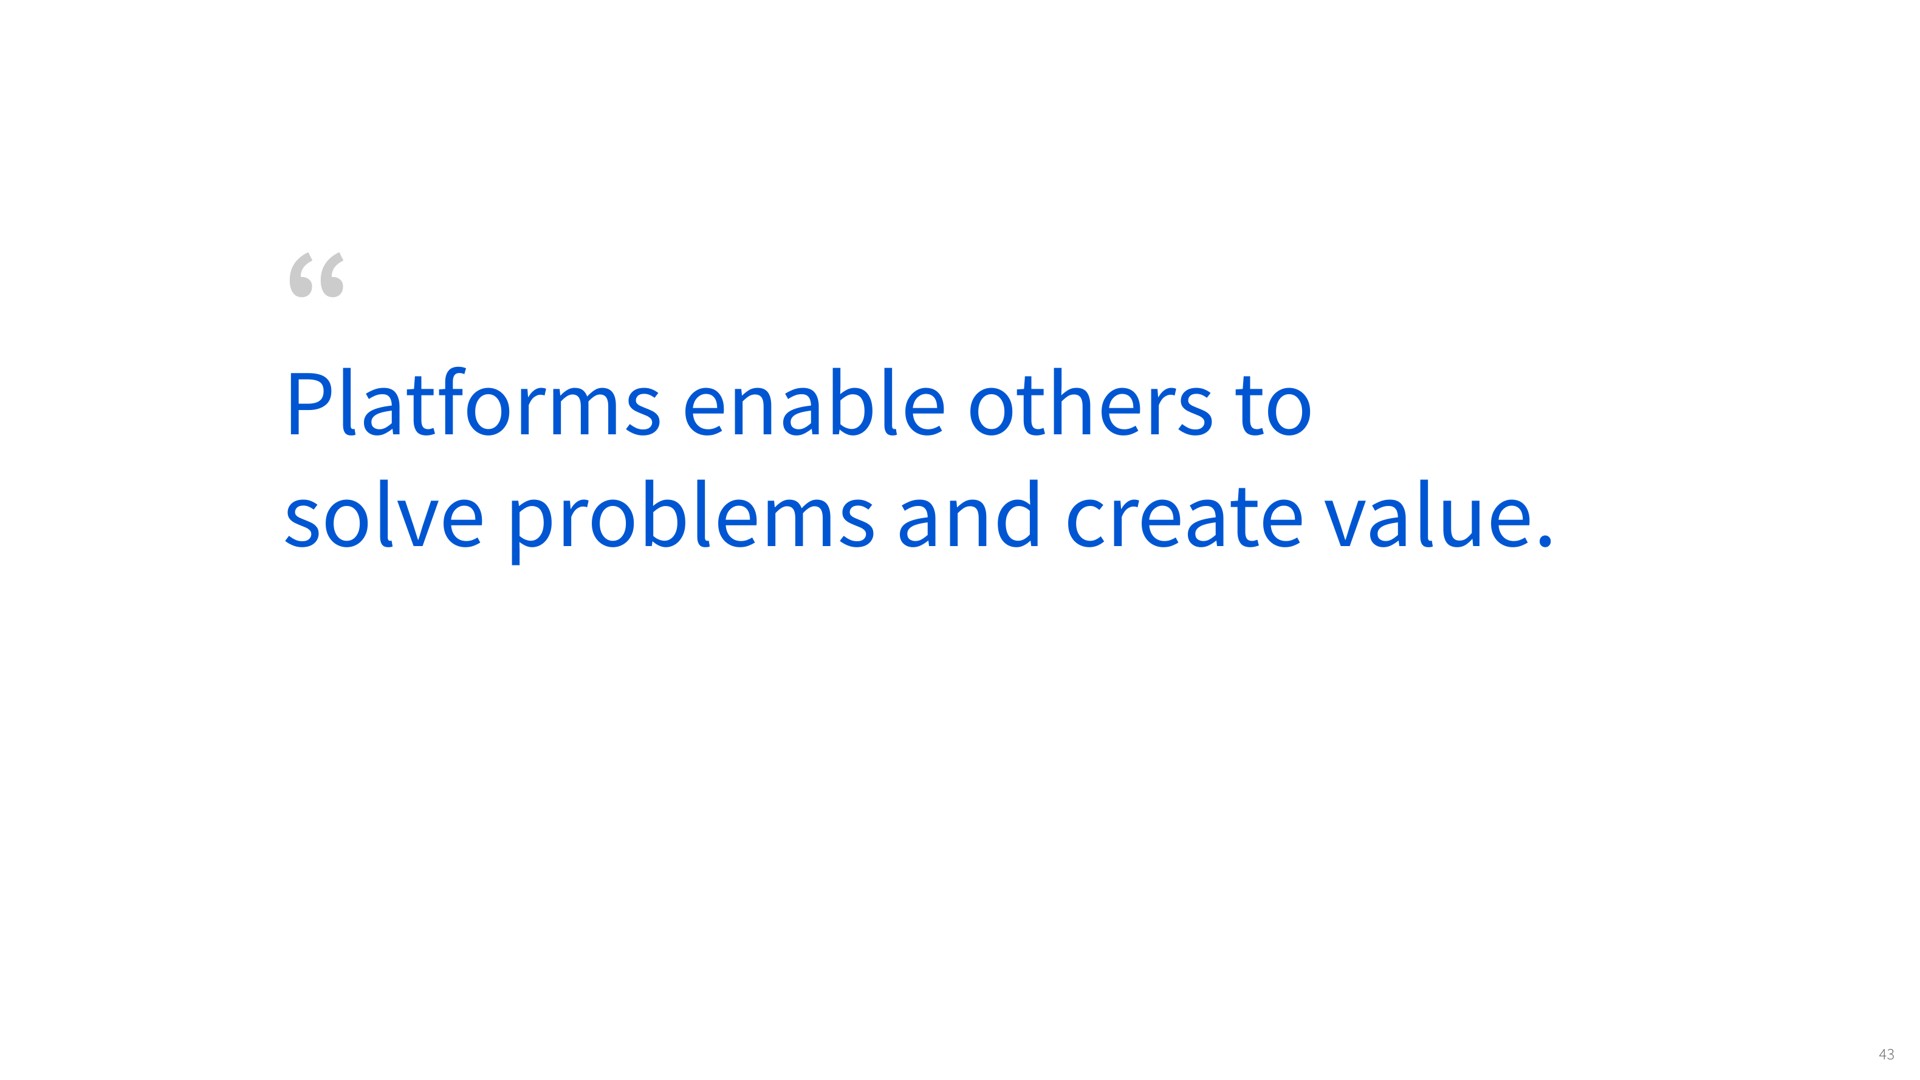 platforms enable to solve problems and create value | Coursera